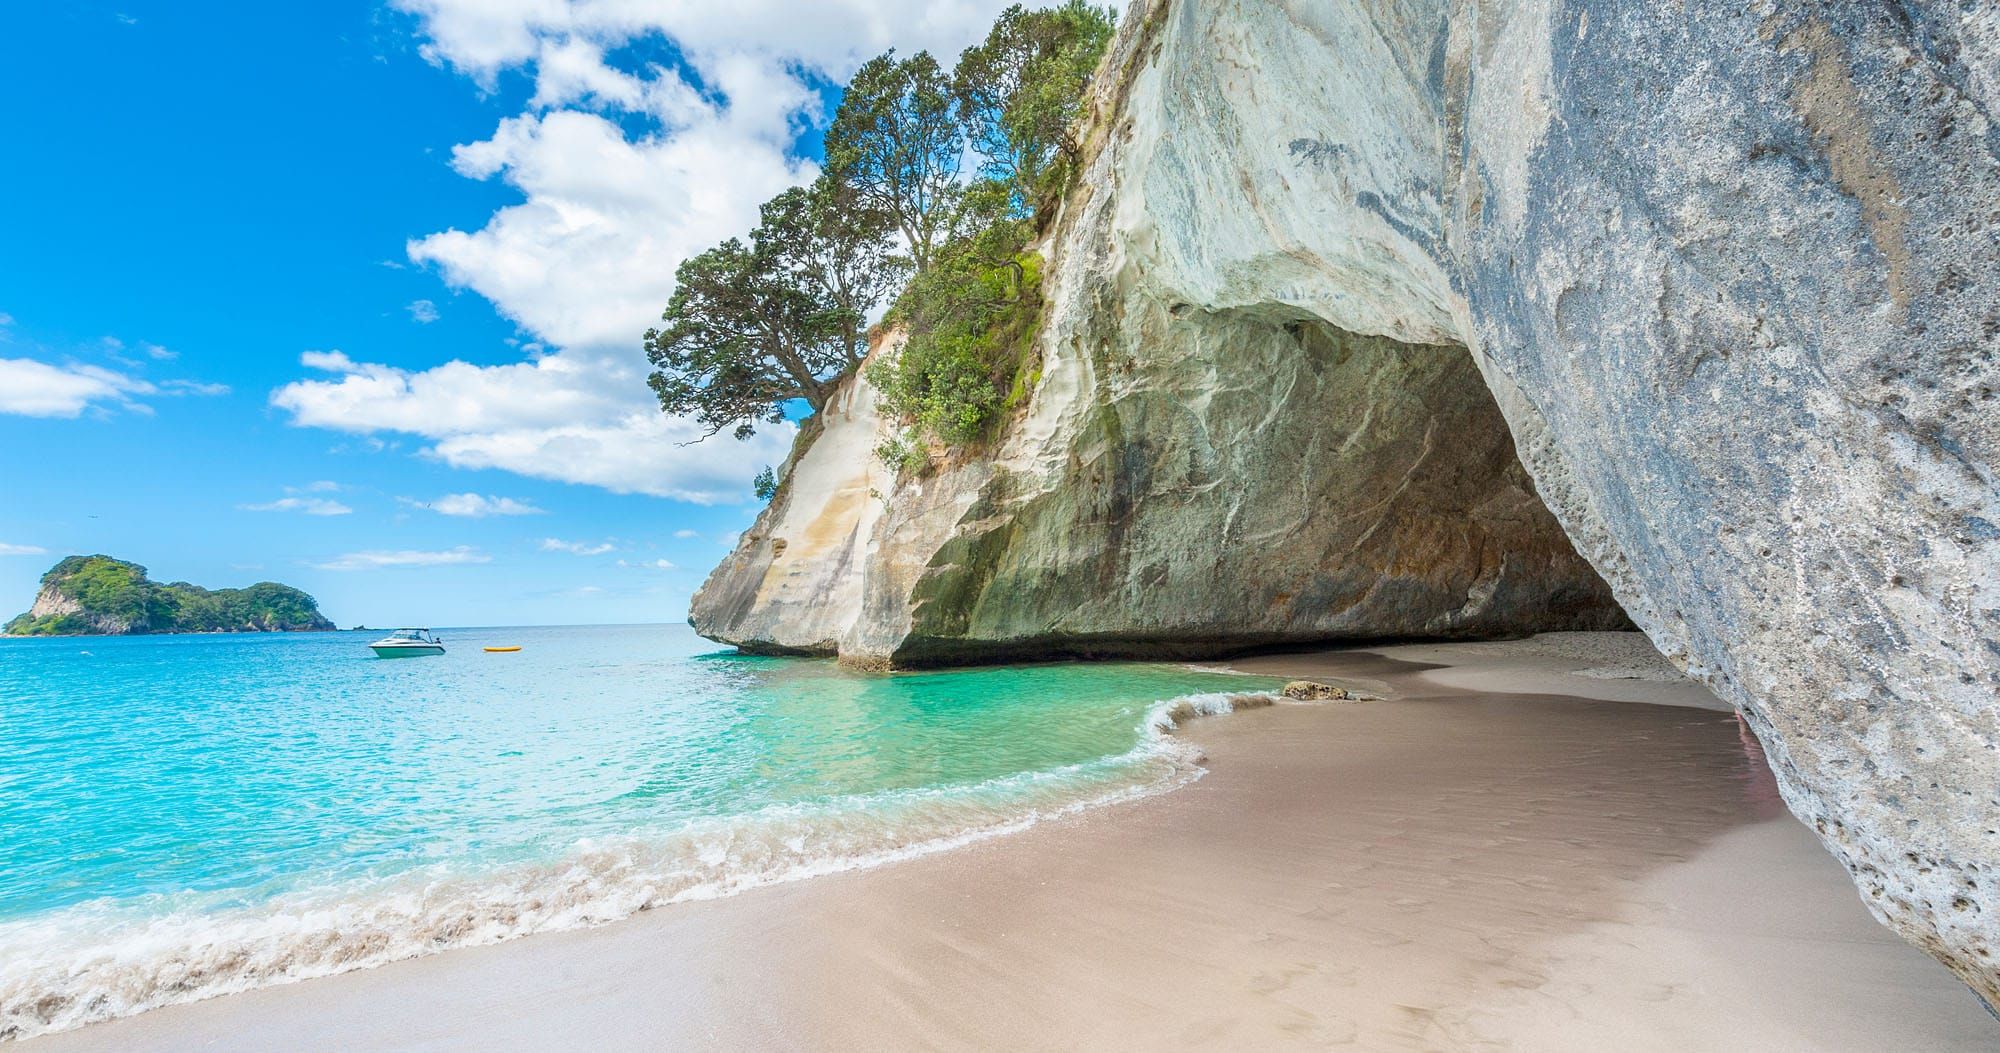 Featured image for “Cathedral Cove Boat Tour | Coromandel Peninsula, New Zealand”